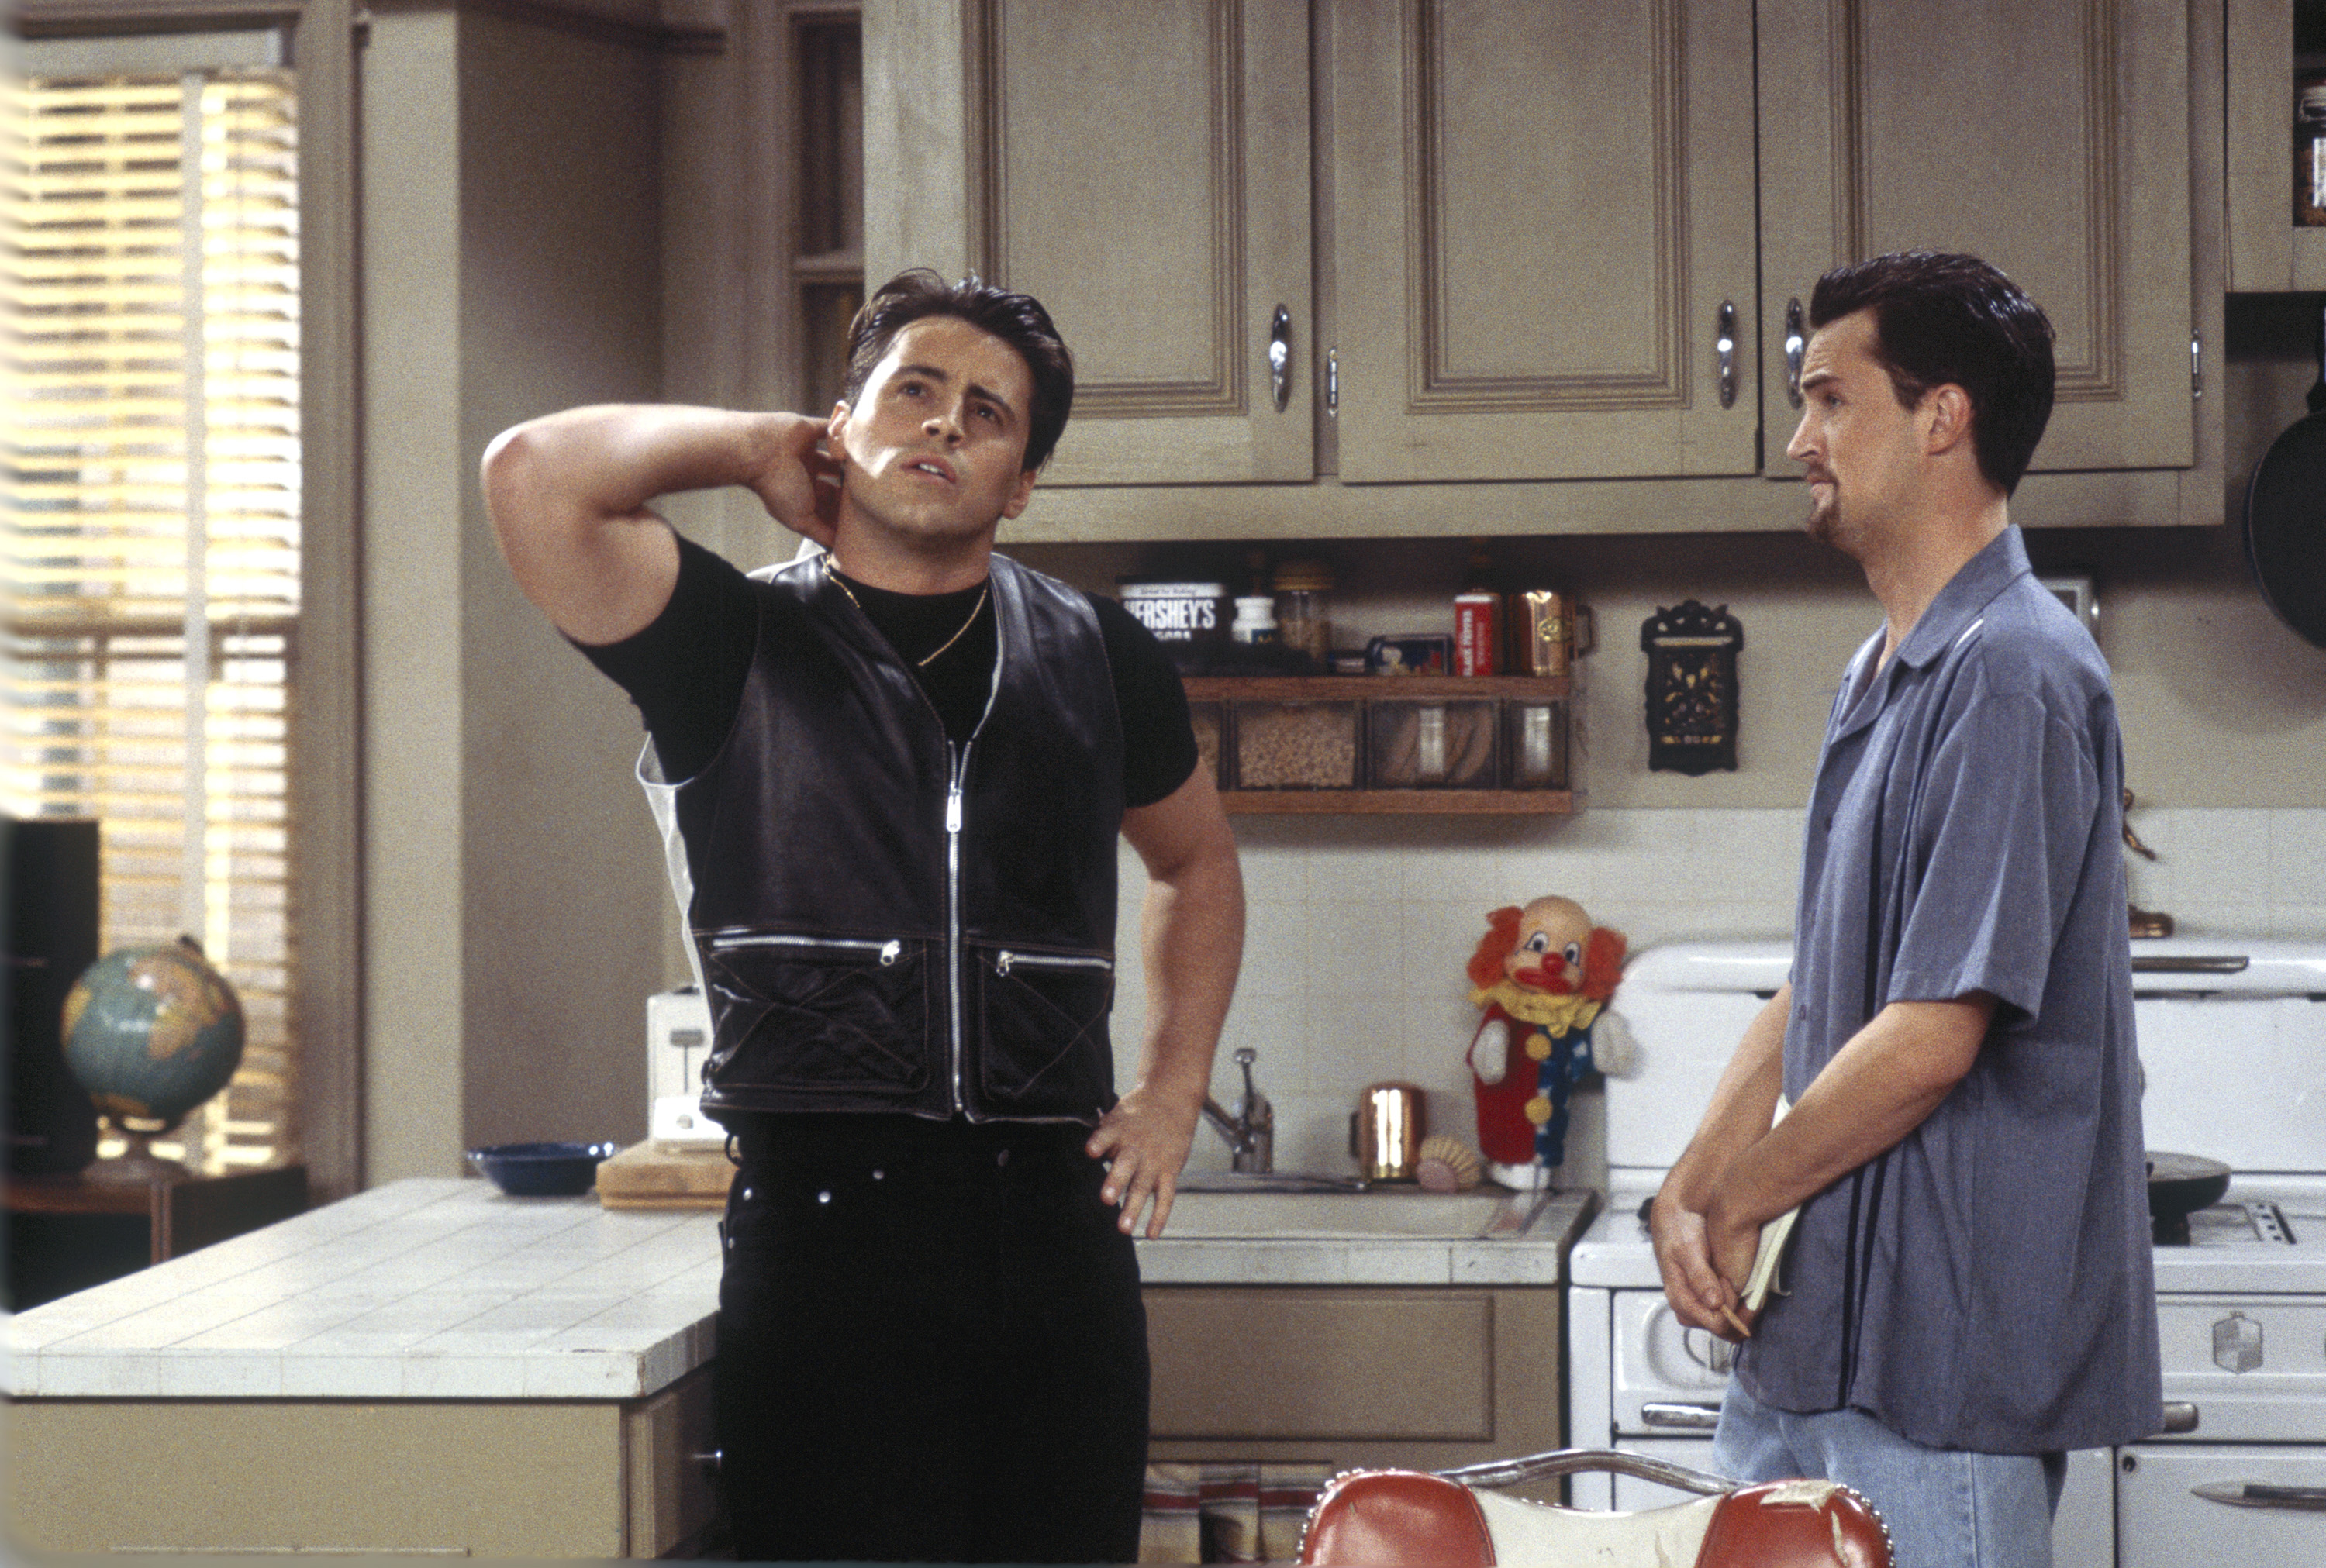 Matt Le Blanc as Joey Tribbiani and Matthew Perry as Chandler Bing. | Source: Getty Images